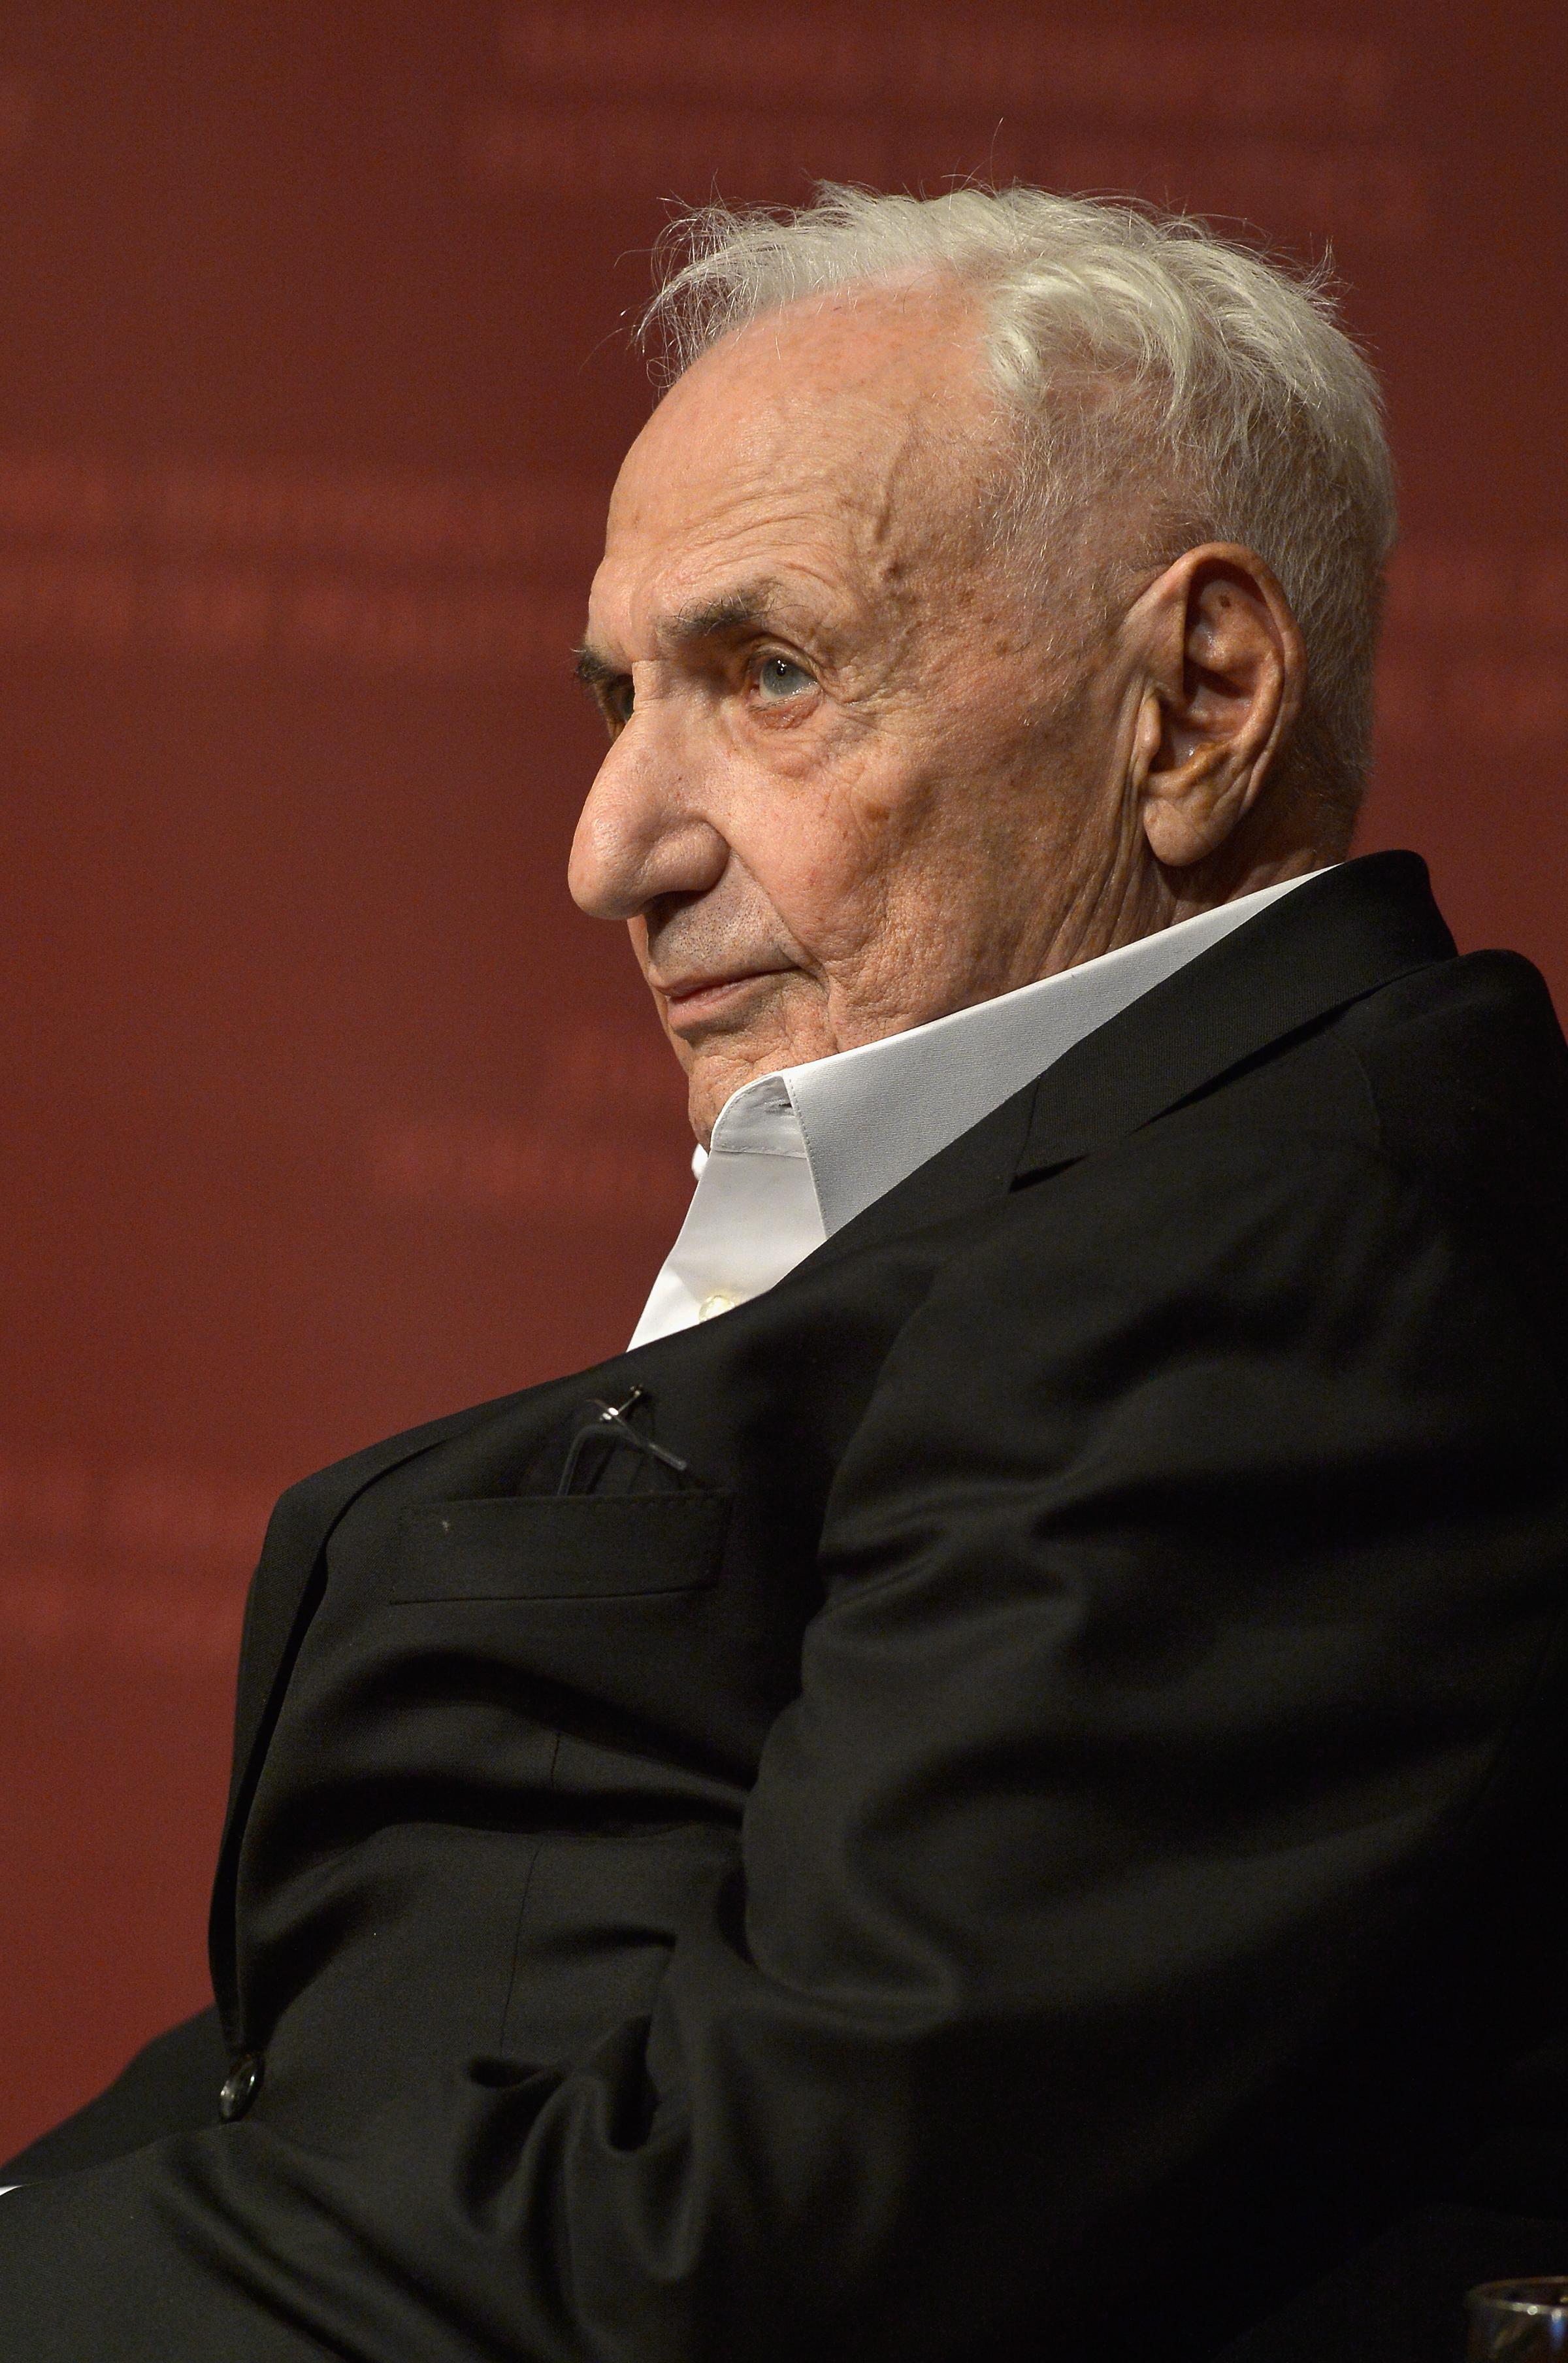 Frank Gehry during "A Conversation with Architect Frank Gehry" at Harvard University in Cambridge, Mass. on Nov. 13, 2015.